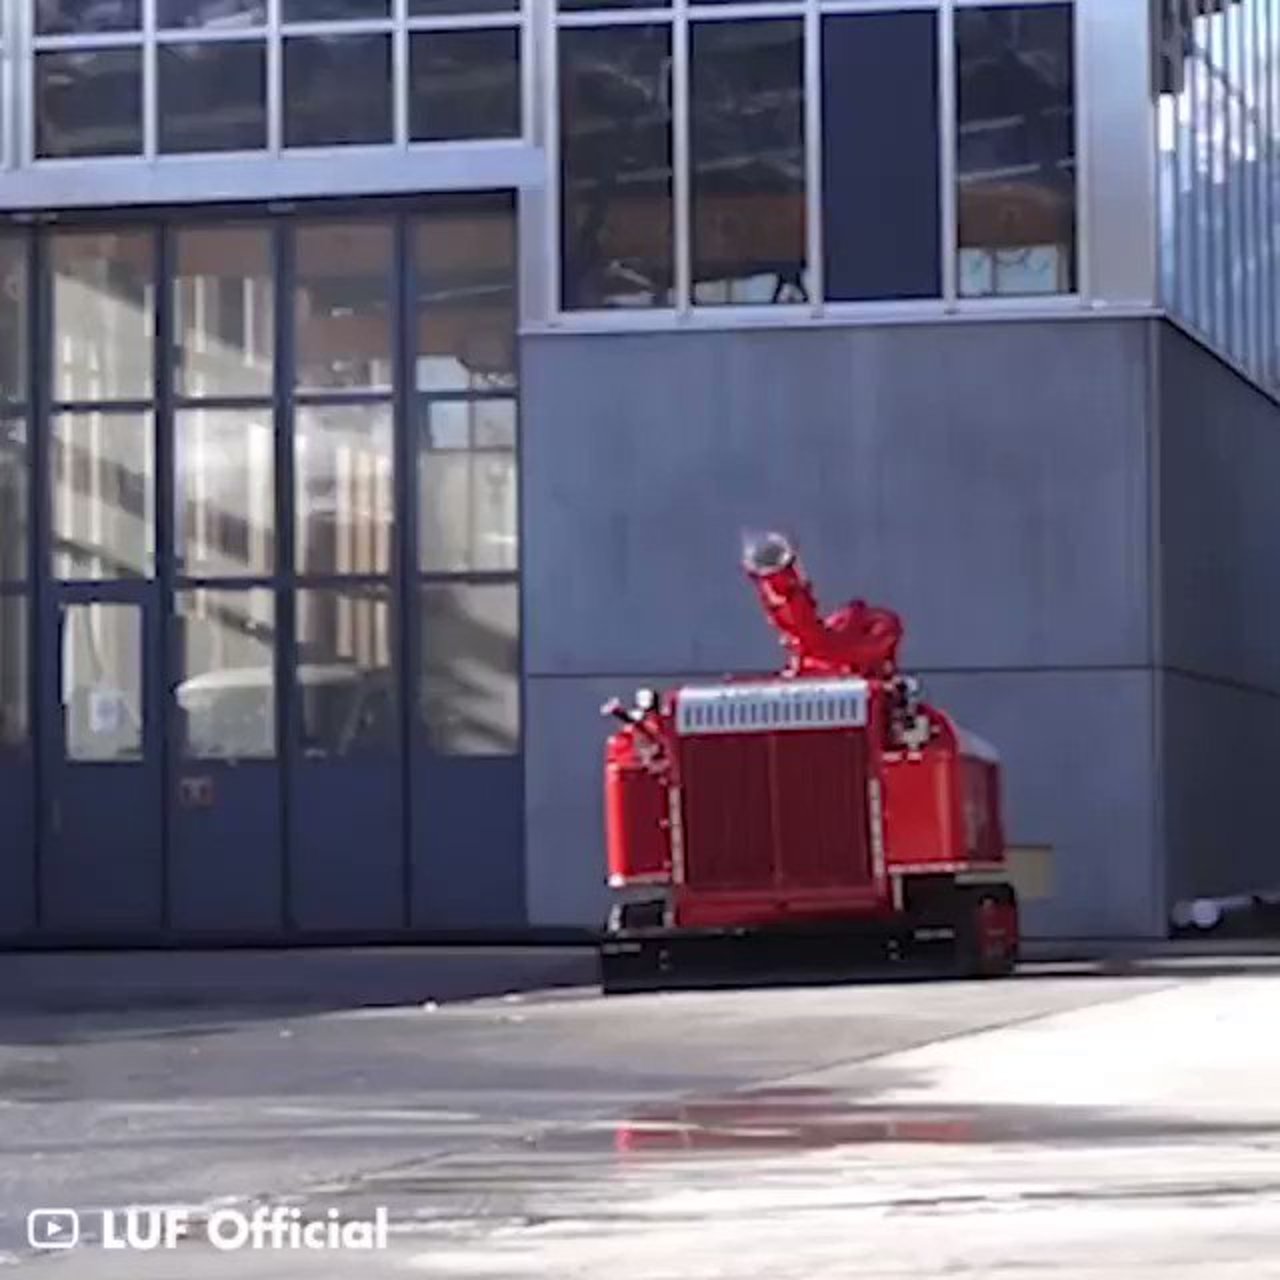 This #Robot throws water from 361 ft away to put out a large fire by @gigadgets_ #AI #ArtificialIntelligence #MI #Robotics #Engineering #Innovation #FutureOfWork #Tech #Technology cc: @ronald_vanloon @pbalakrishnarao @chr1sa https://t.co/RB4AyofnDm